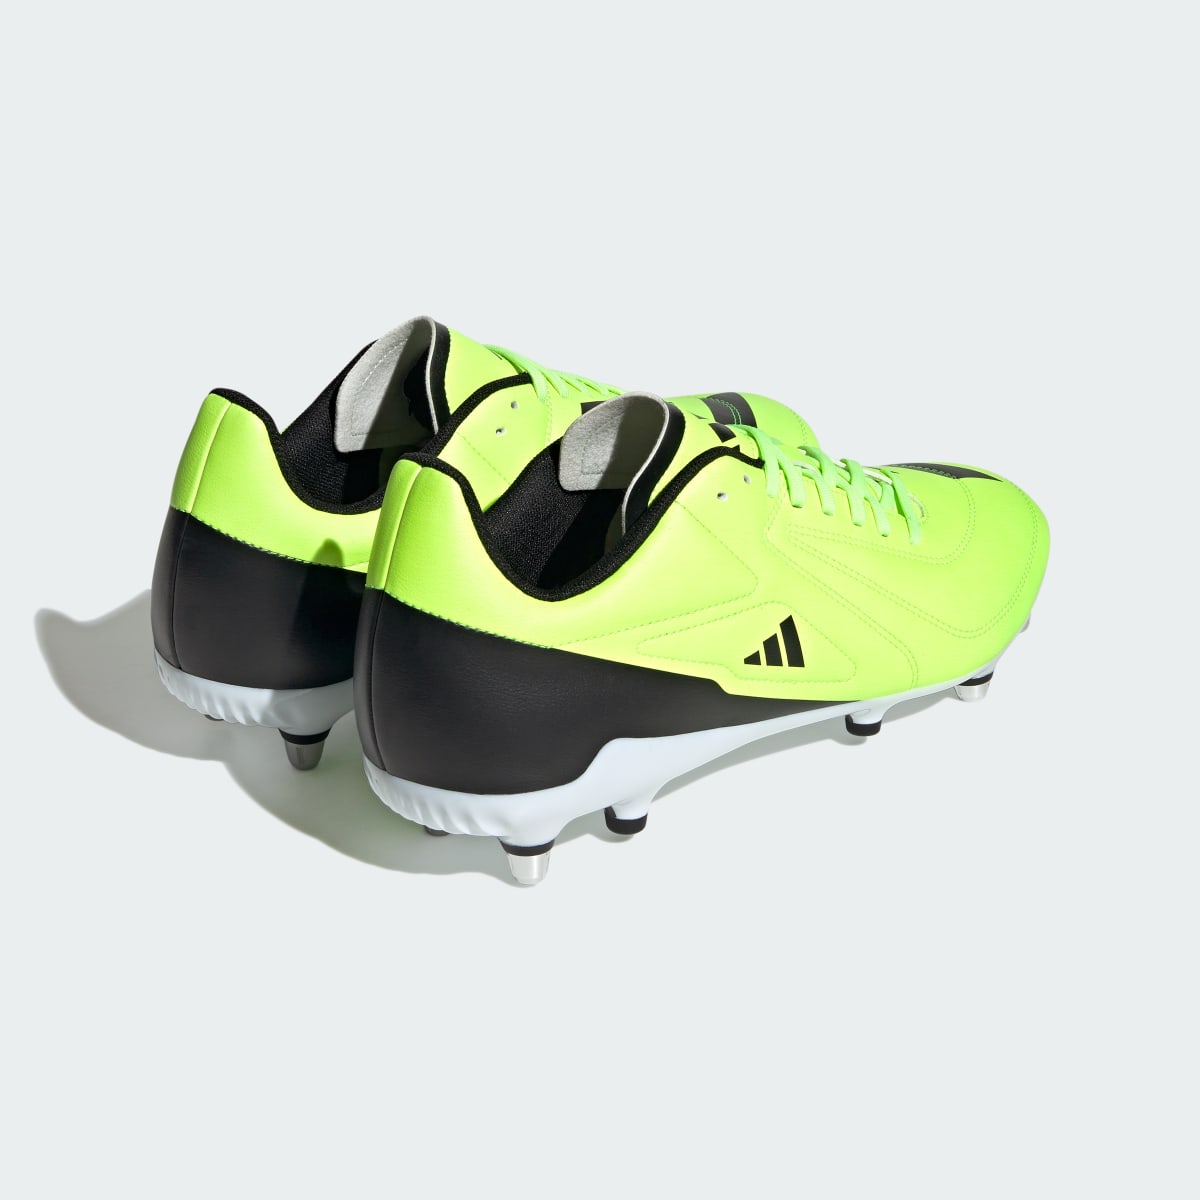 Adidas RS15 Soft Ground Rugby Boots. 9